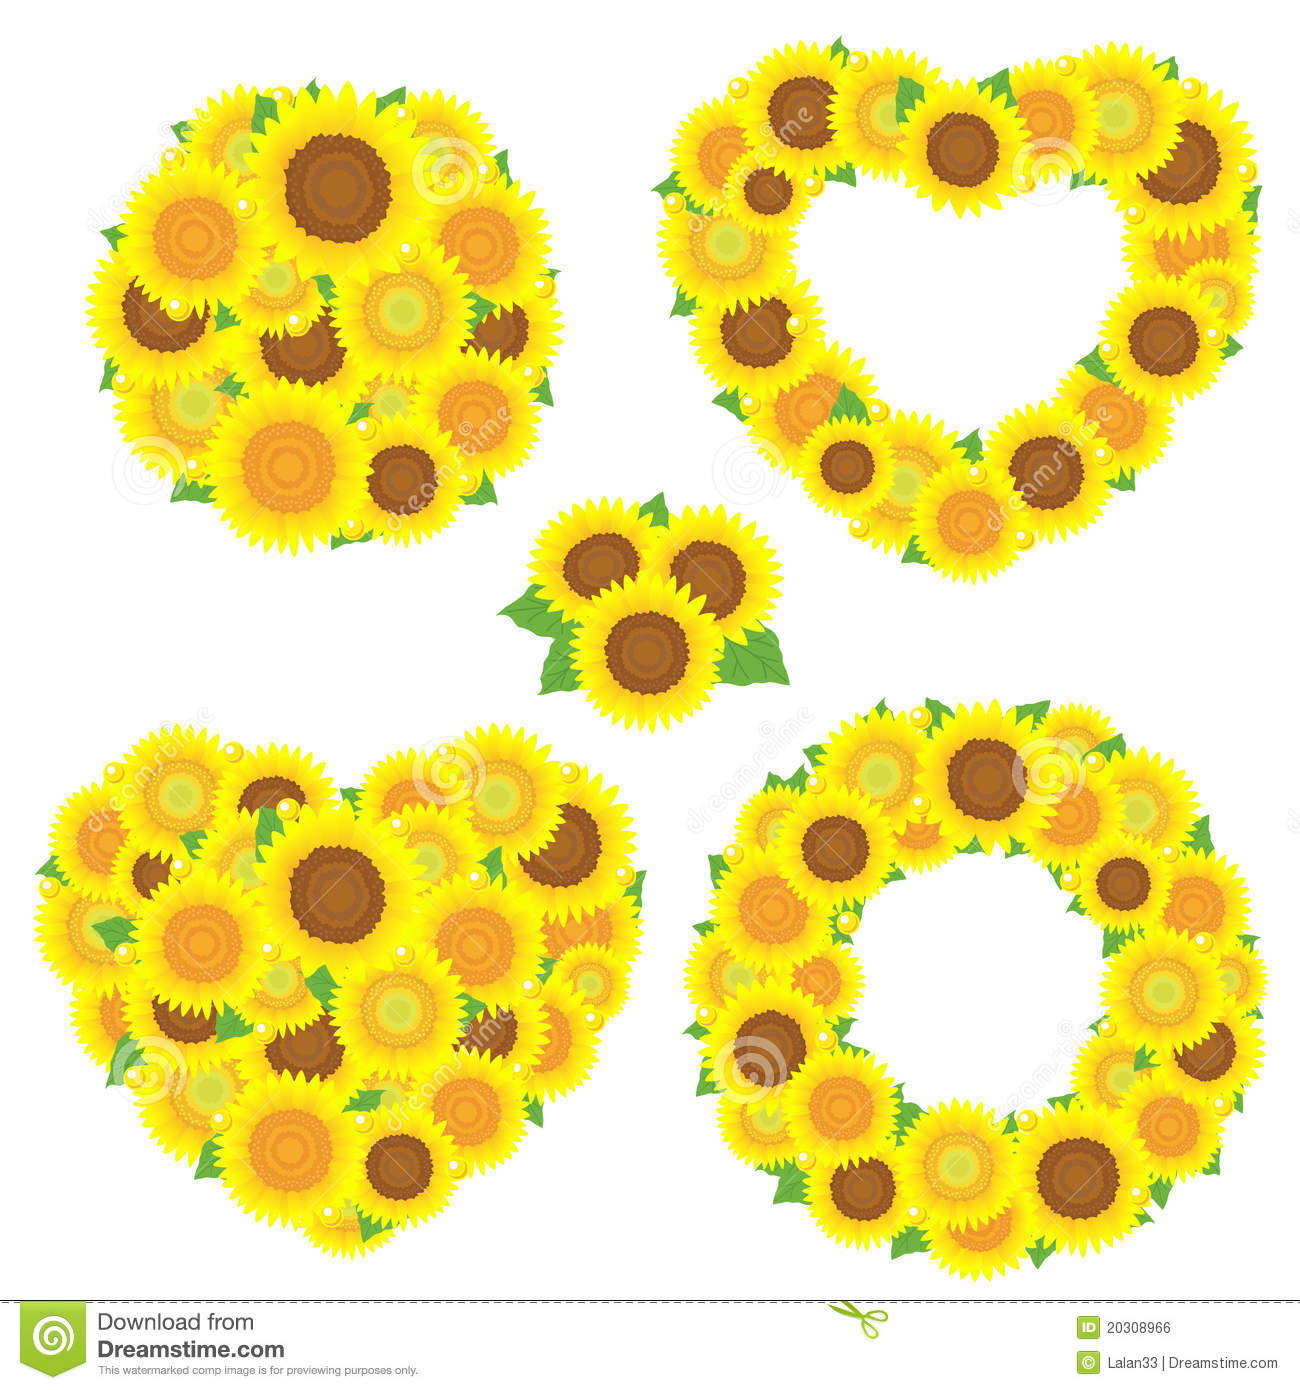 Sunflower Bouquet Royalty Free Stock Image   Image  20308966